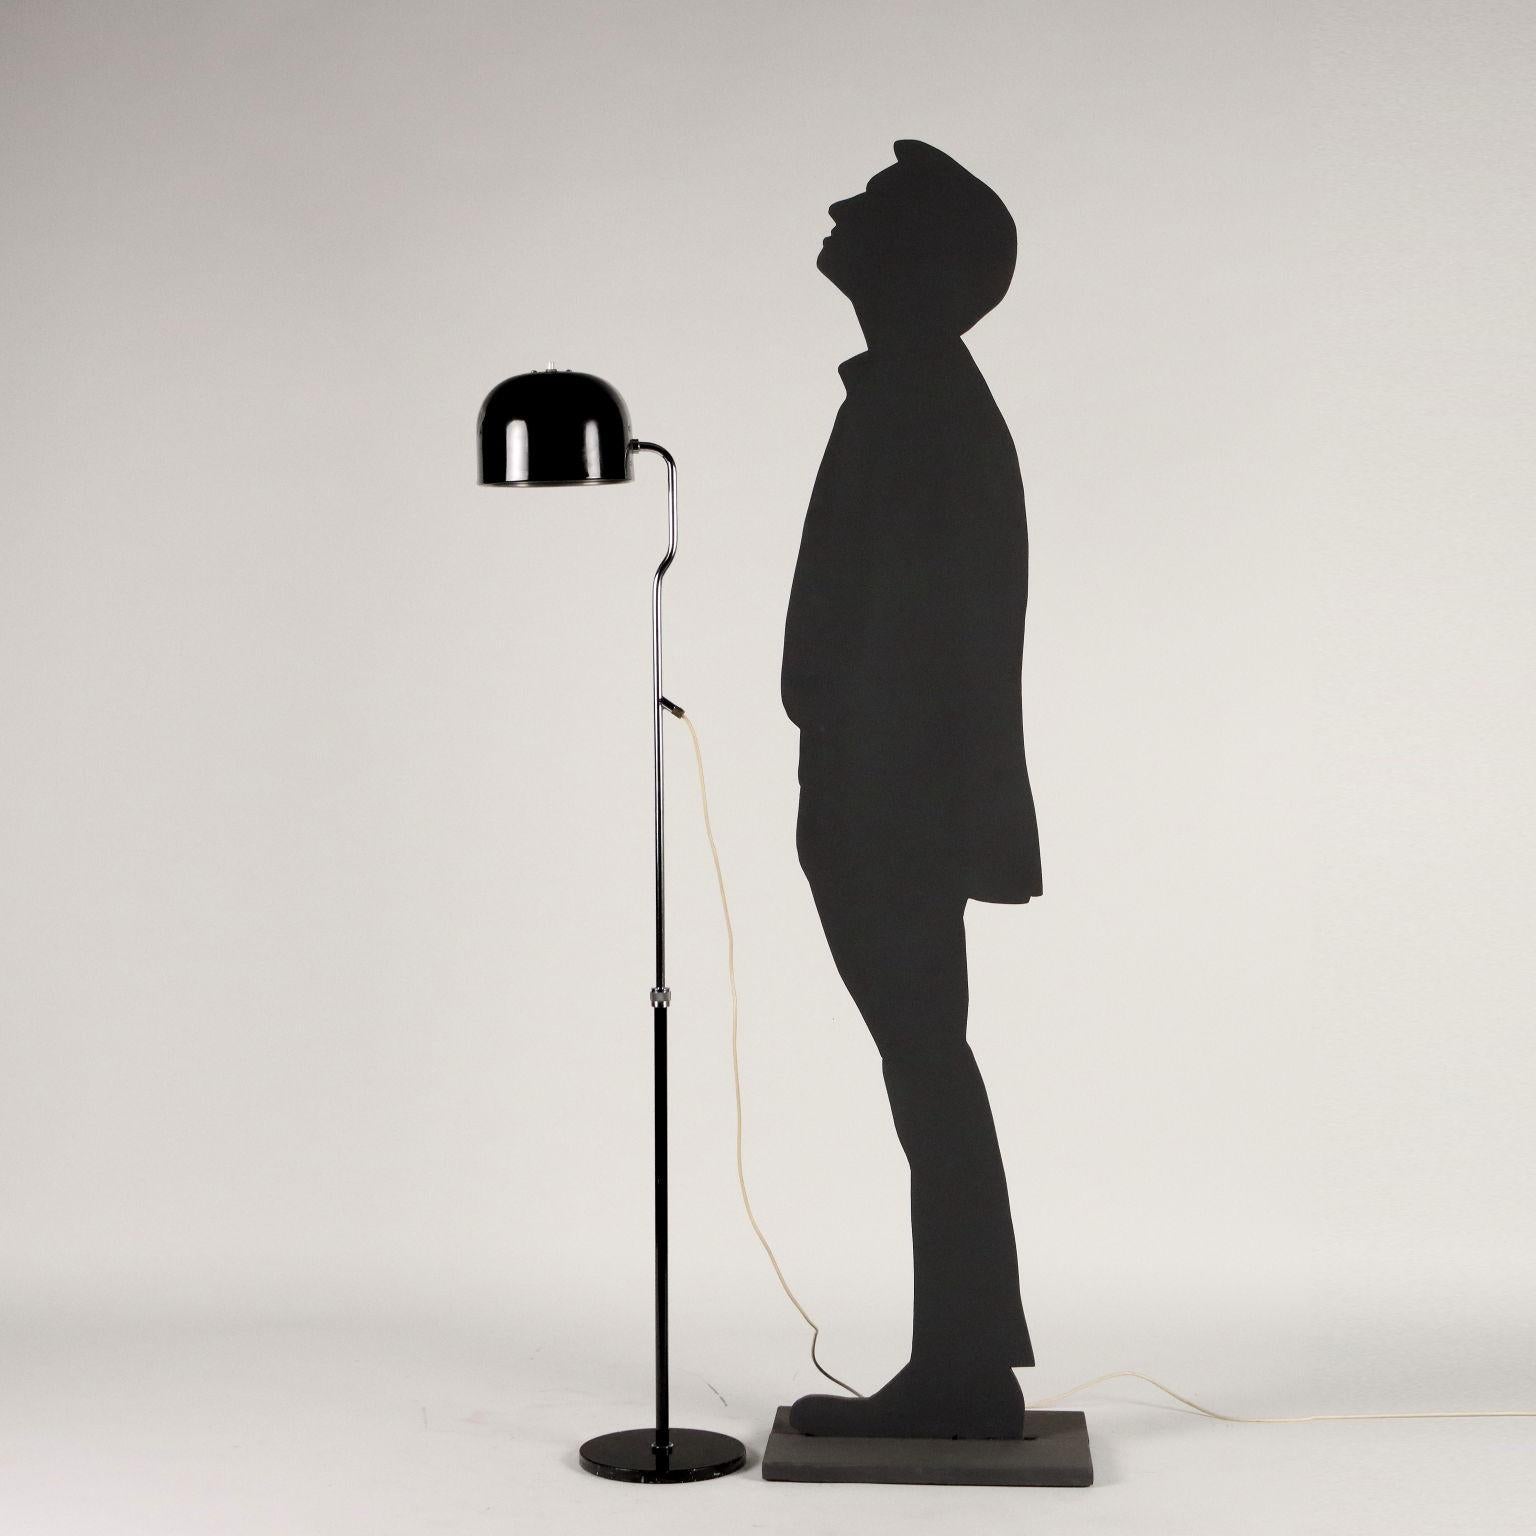 Floor lamp with extendable stem for height adjustment; metal and aluminium, enamelled and chromed.